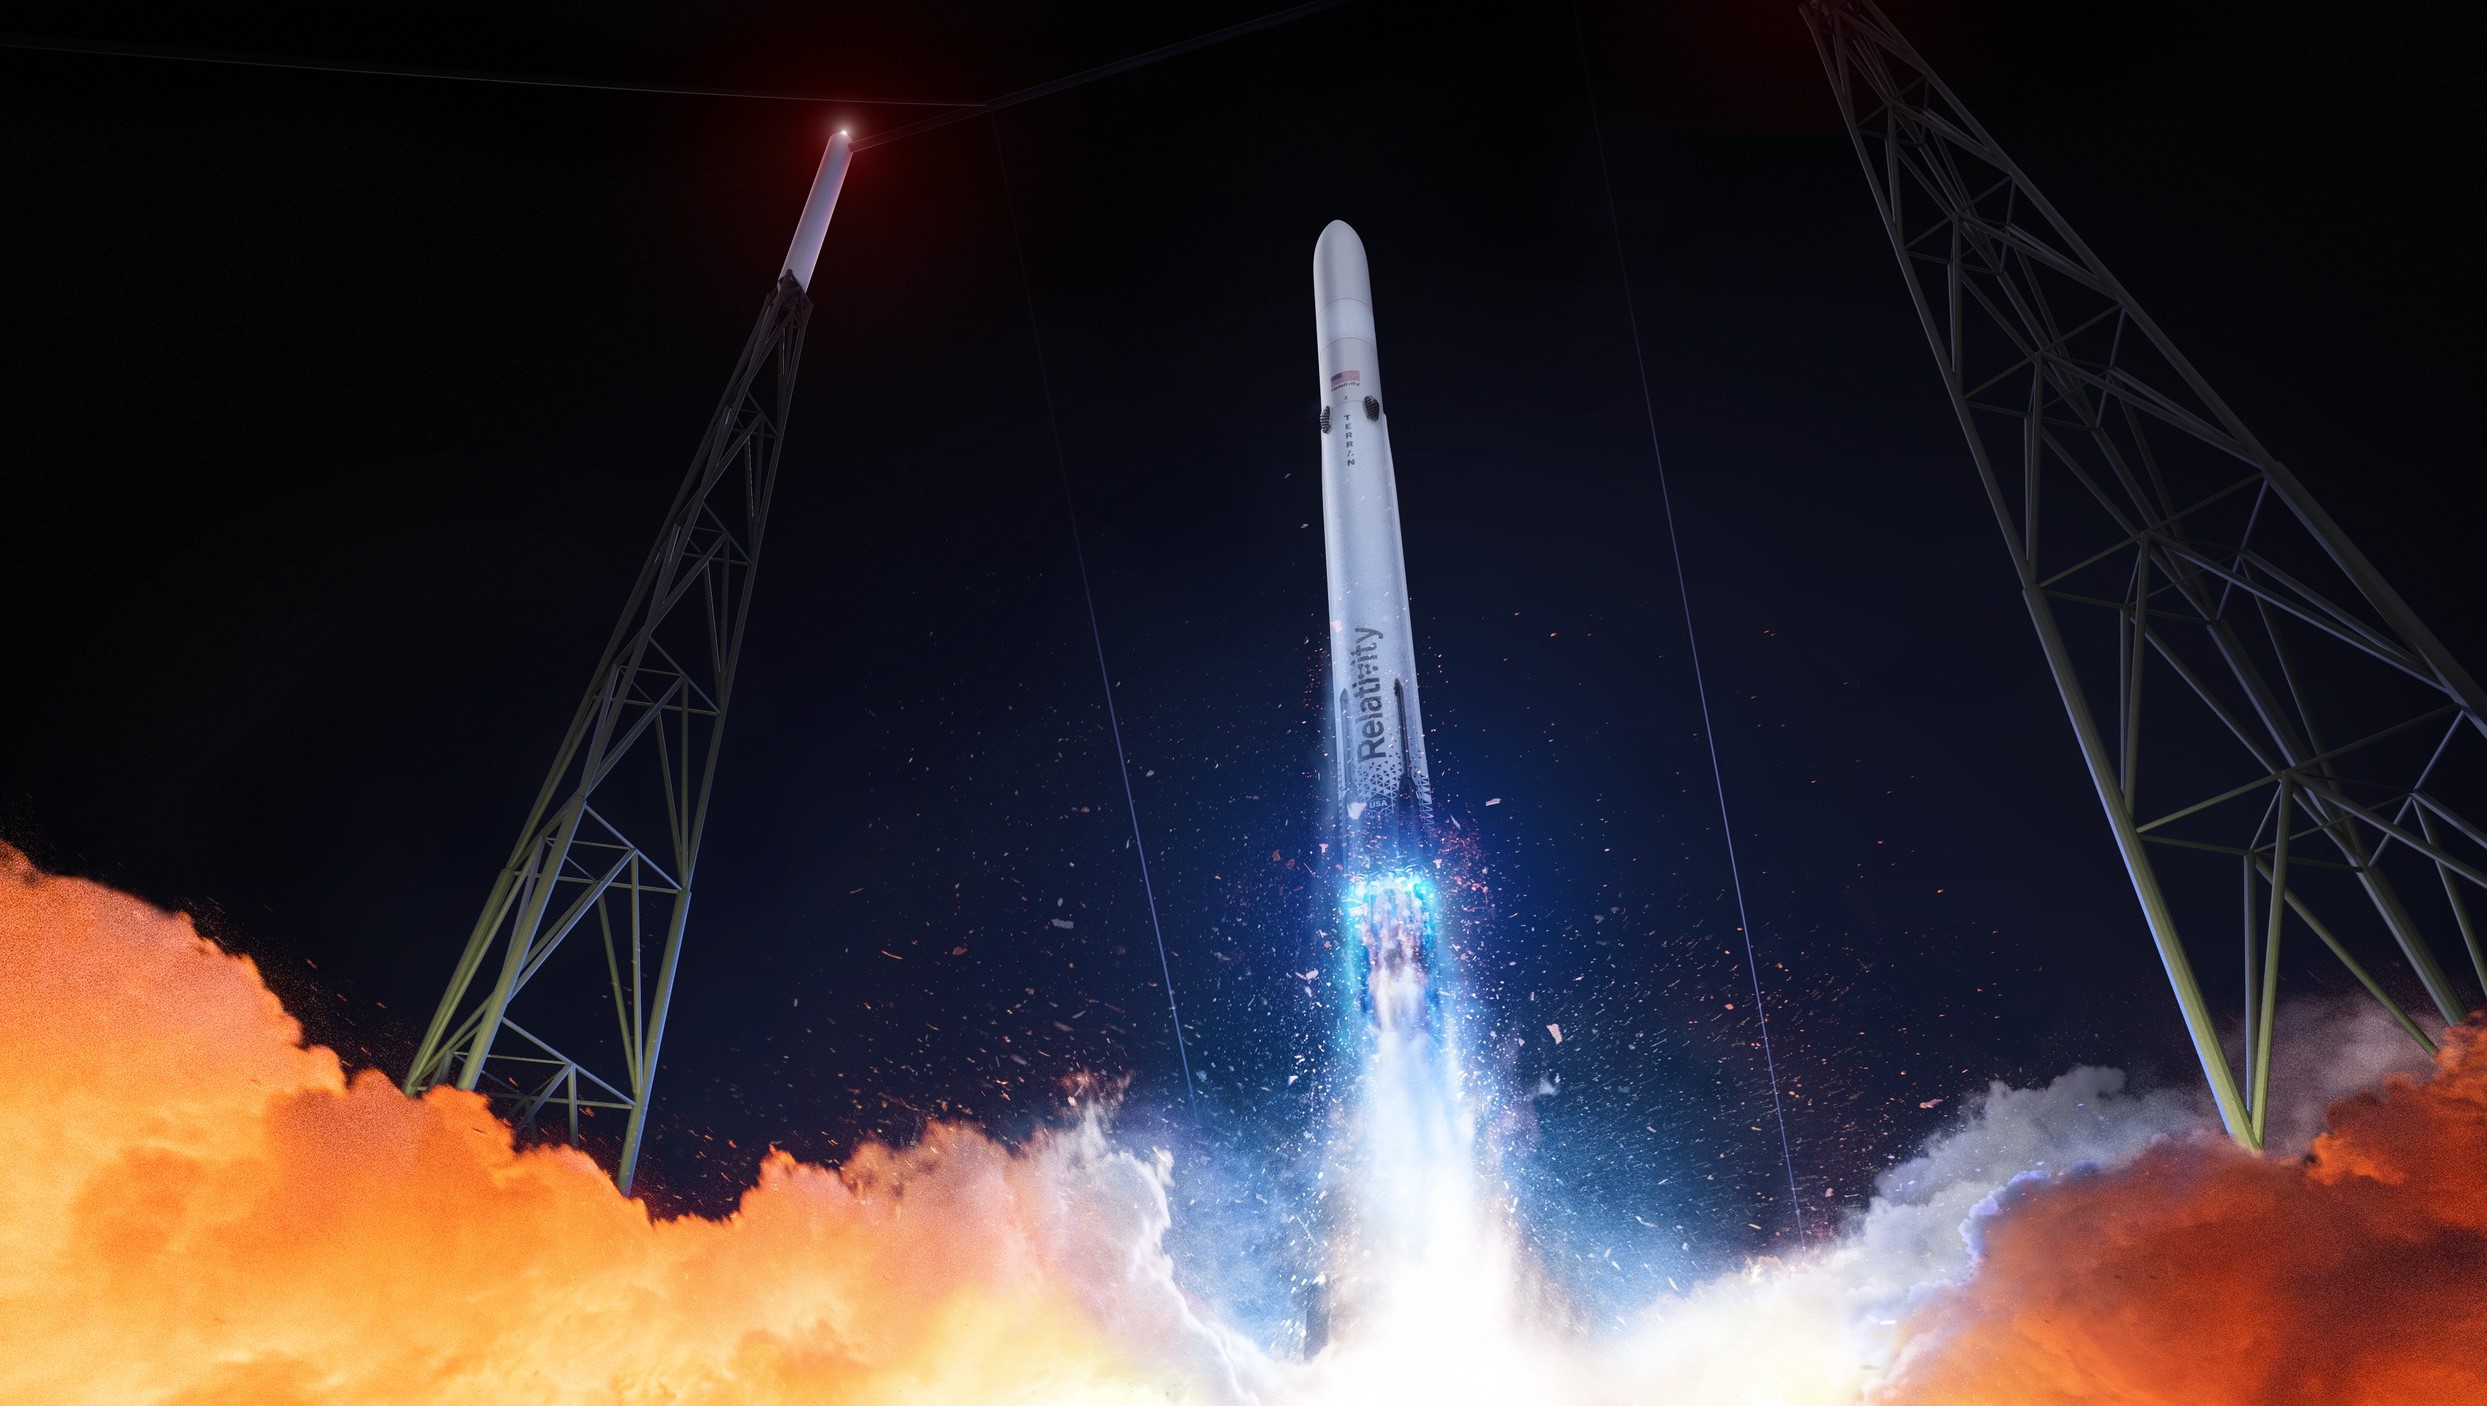 Space investing: World's first 3D-printed rocket is set to launch